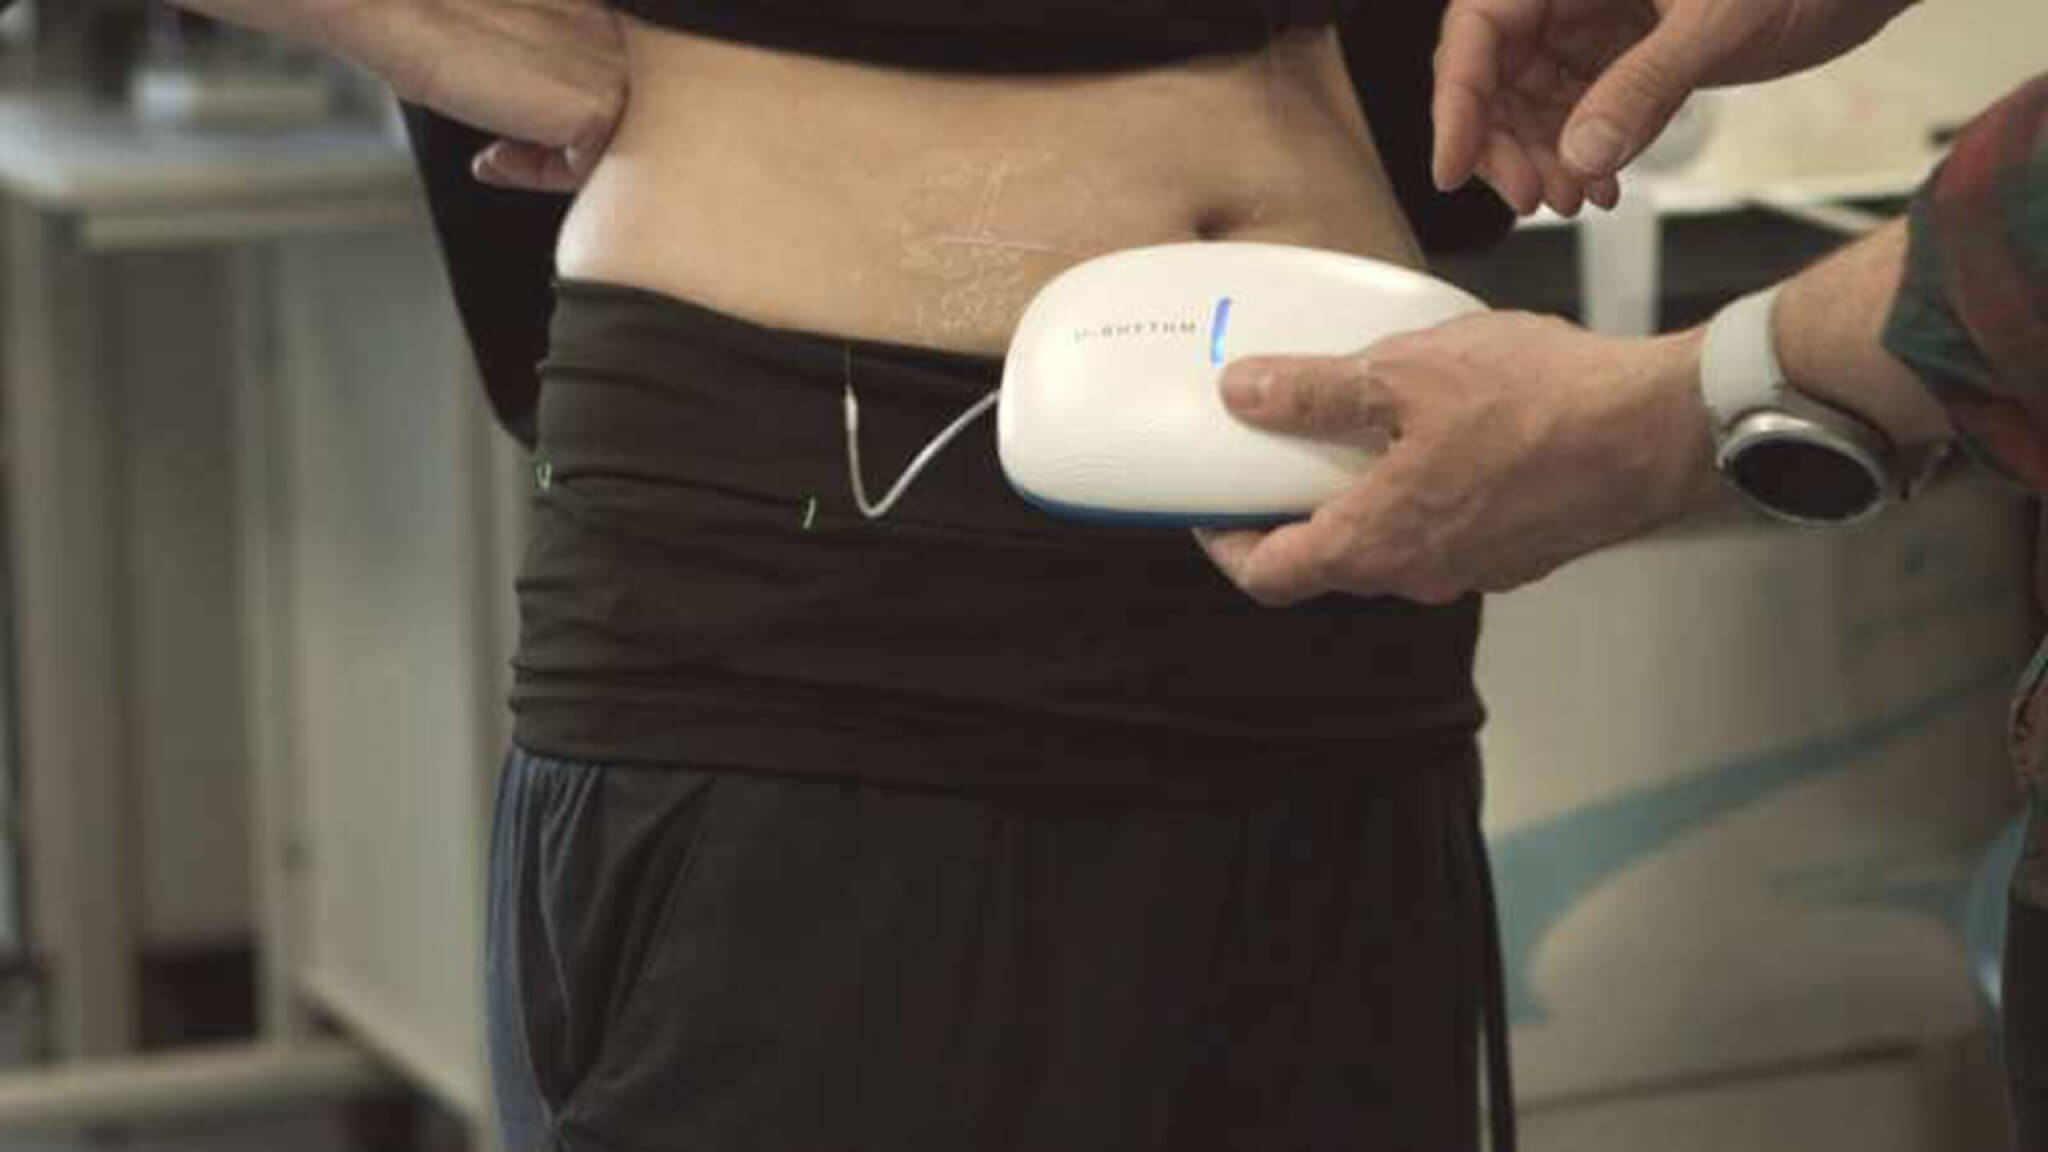 The U-RHYTHM device is worn in a comfortable band placed around the hips.